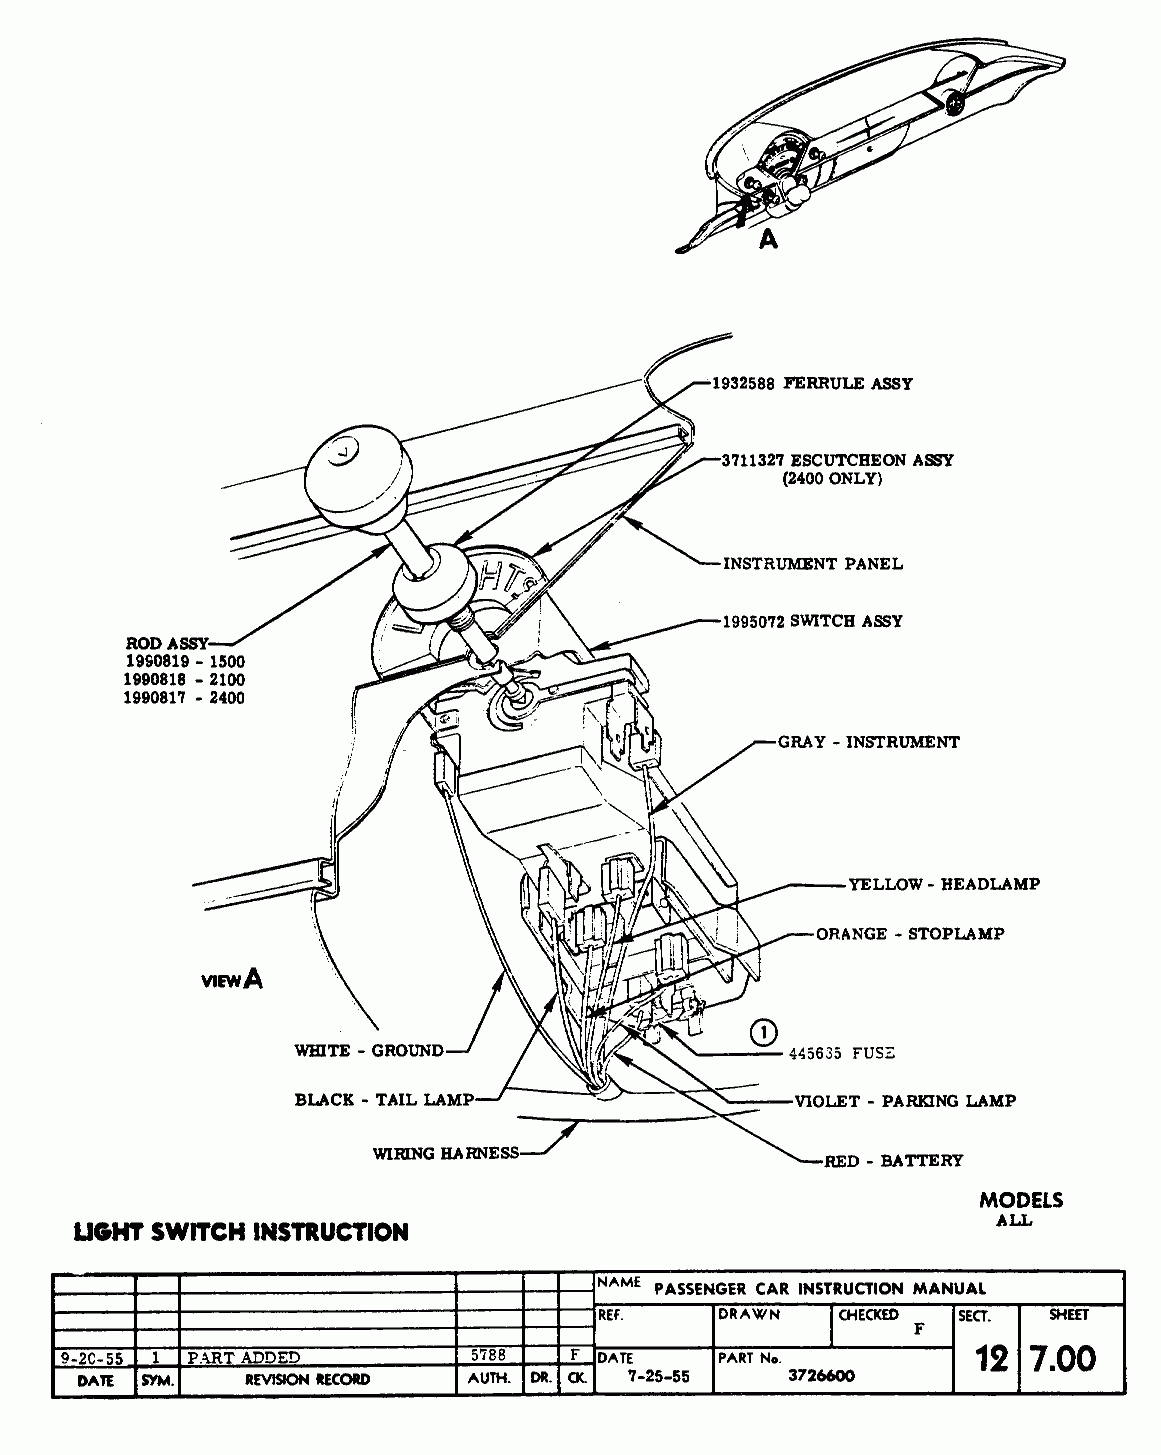 Wiring Diagram For Gm Light Switch | Wiring Diagram - Chevy Headlight Switch Wiring Diagram